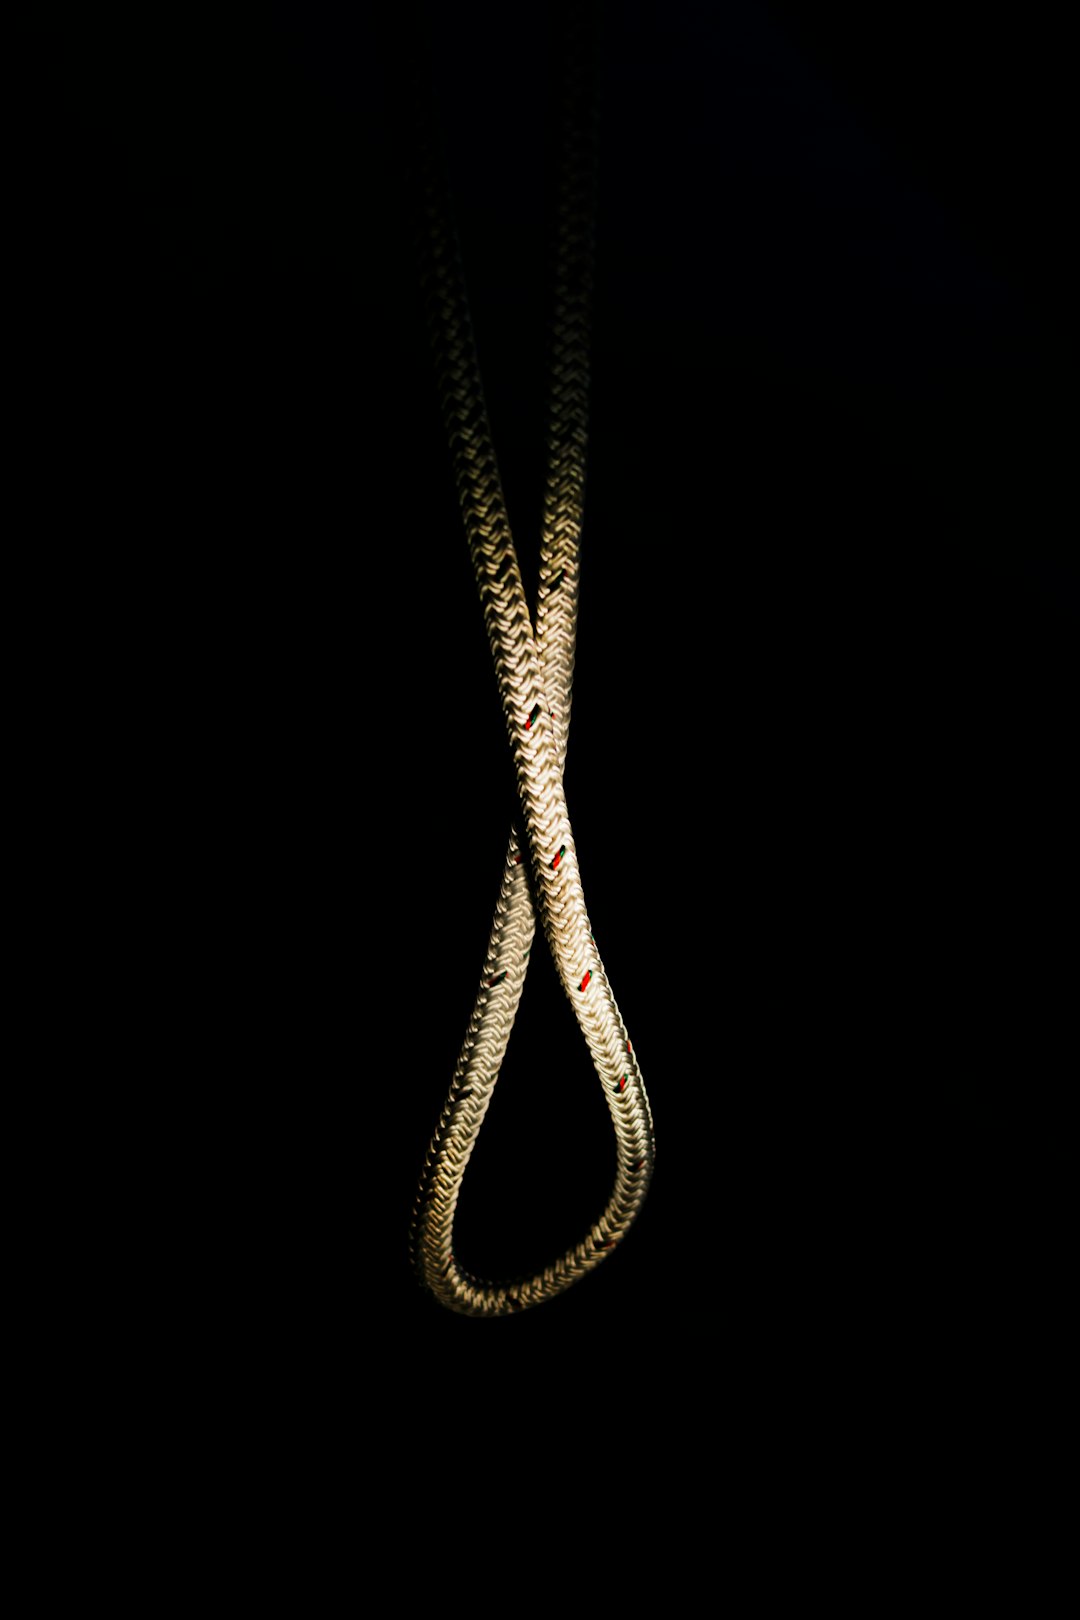 gold-colored necklace on black background